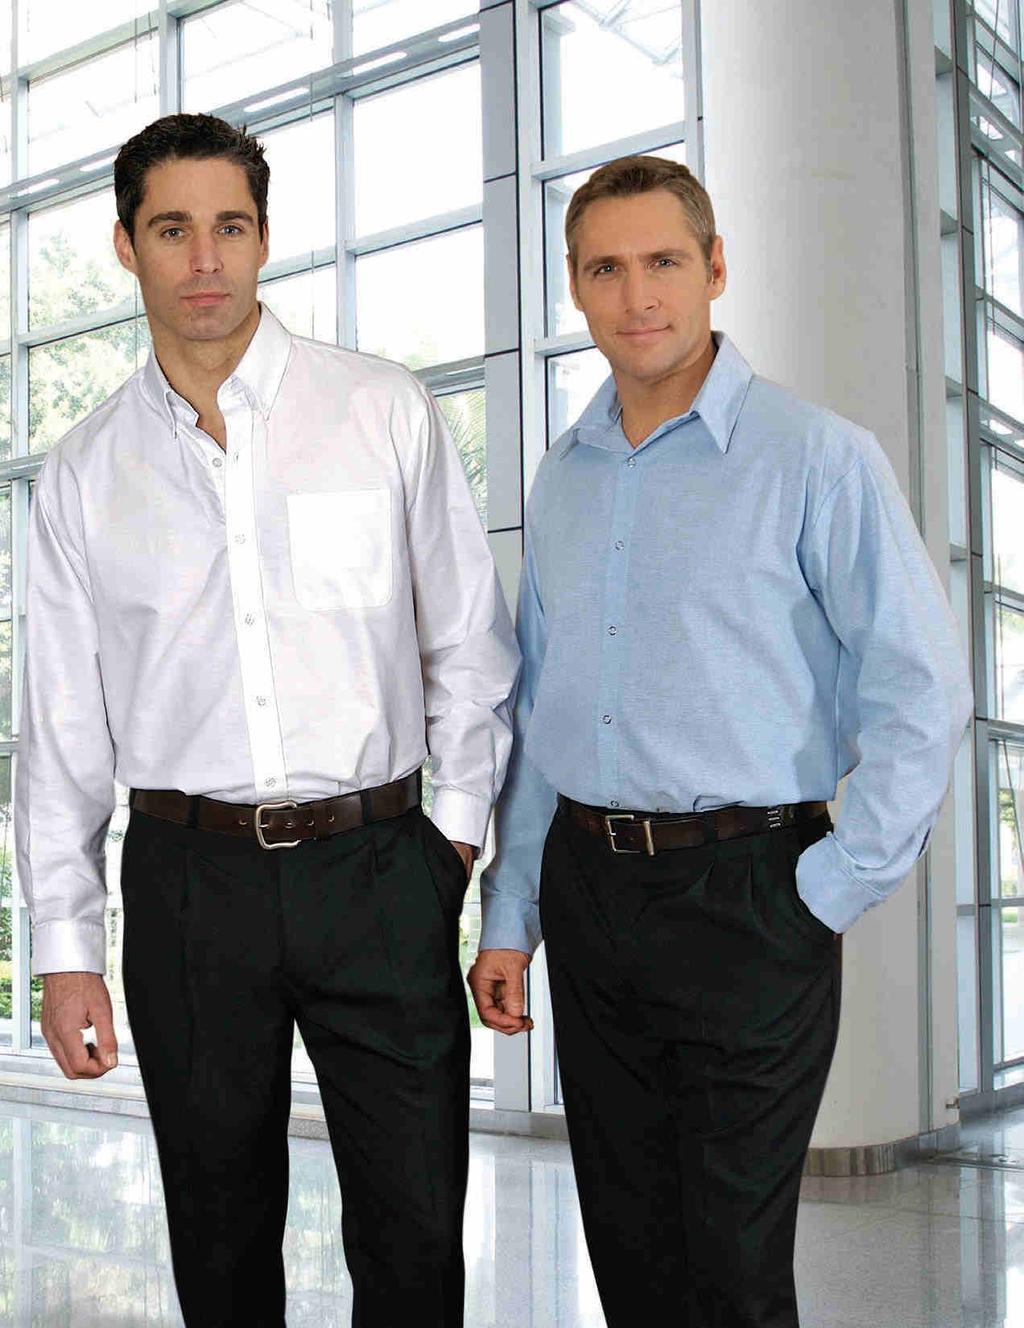 EXECUTIVE SHIRTS 2110 2130 Executive shirt with Buttons Precise details such as a lined button-down collar and top chest pocket create a clean look that s always a clear statement